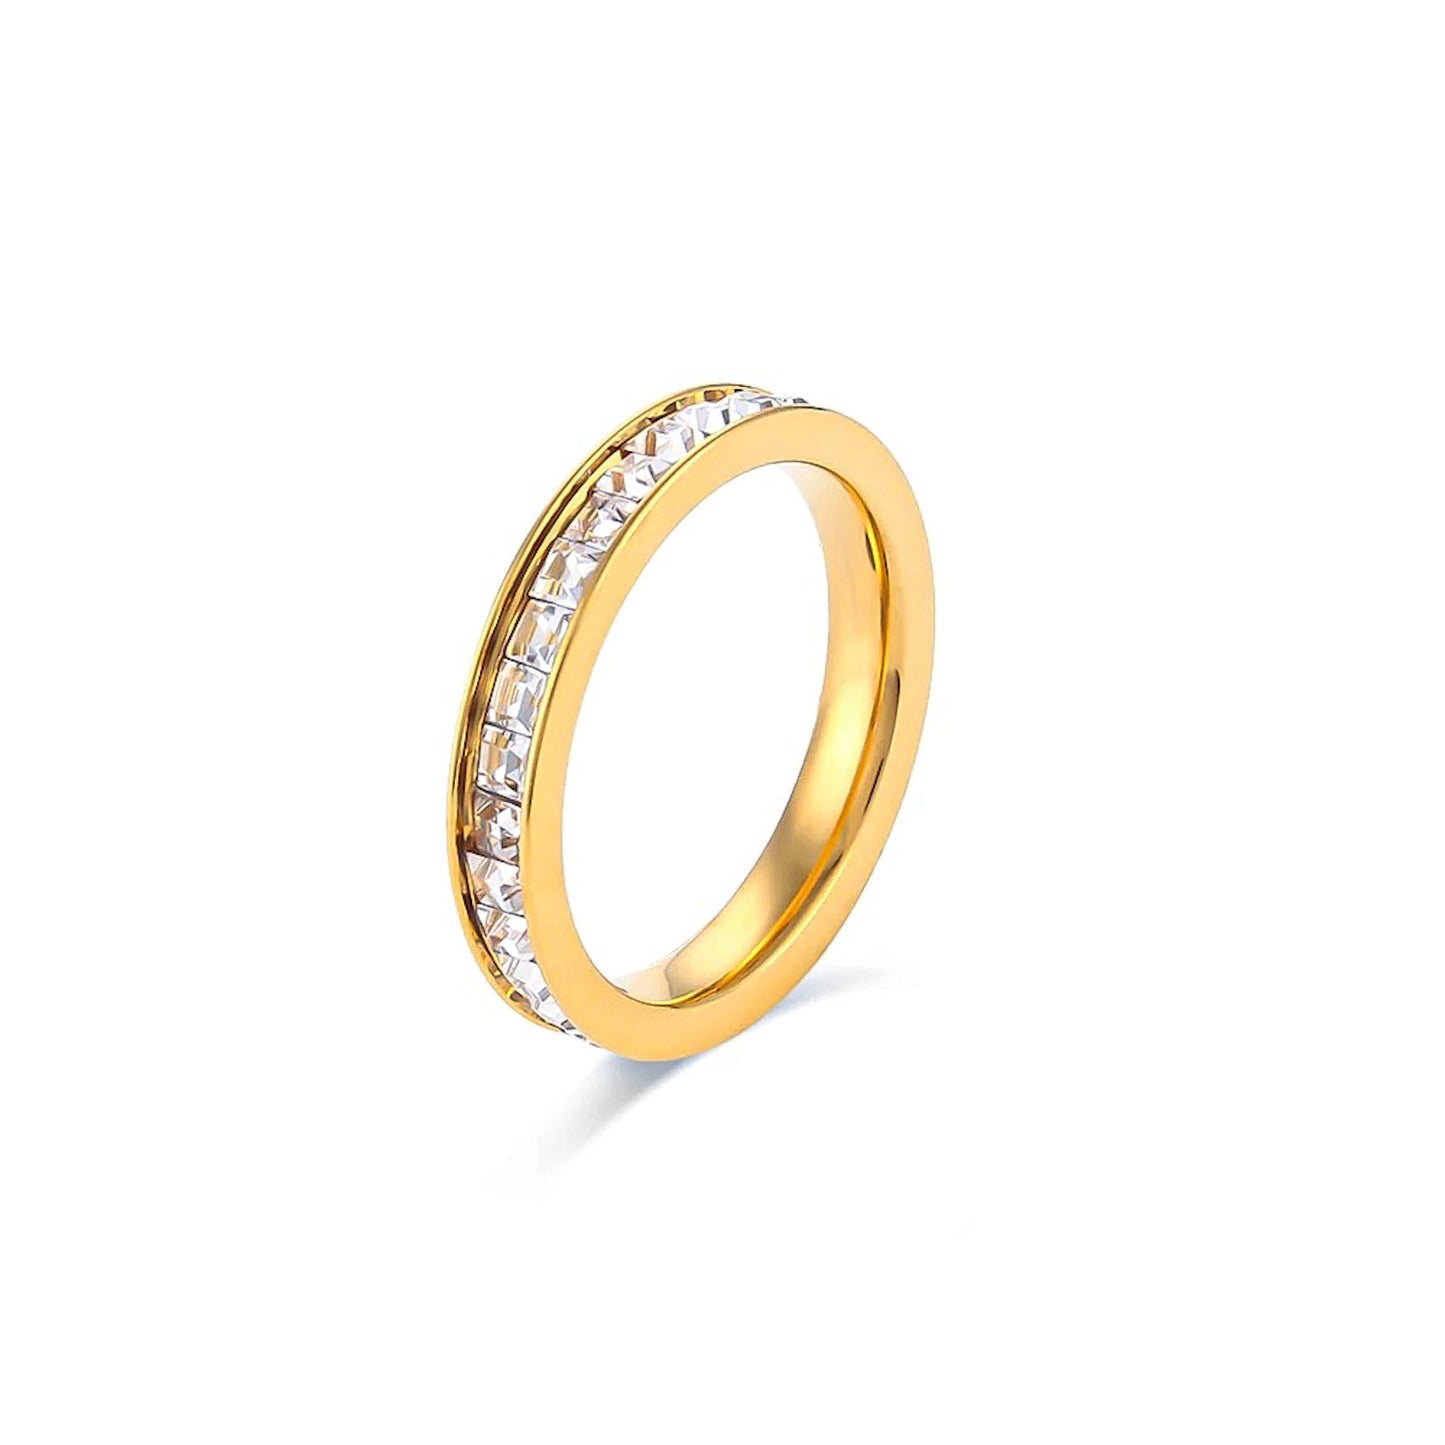 Etoile Ring│18k Gold Plated